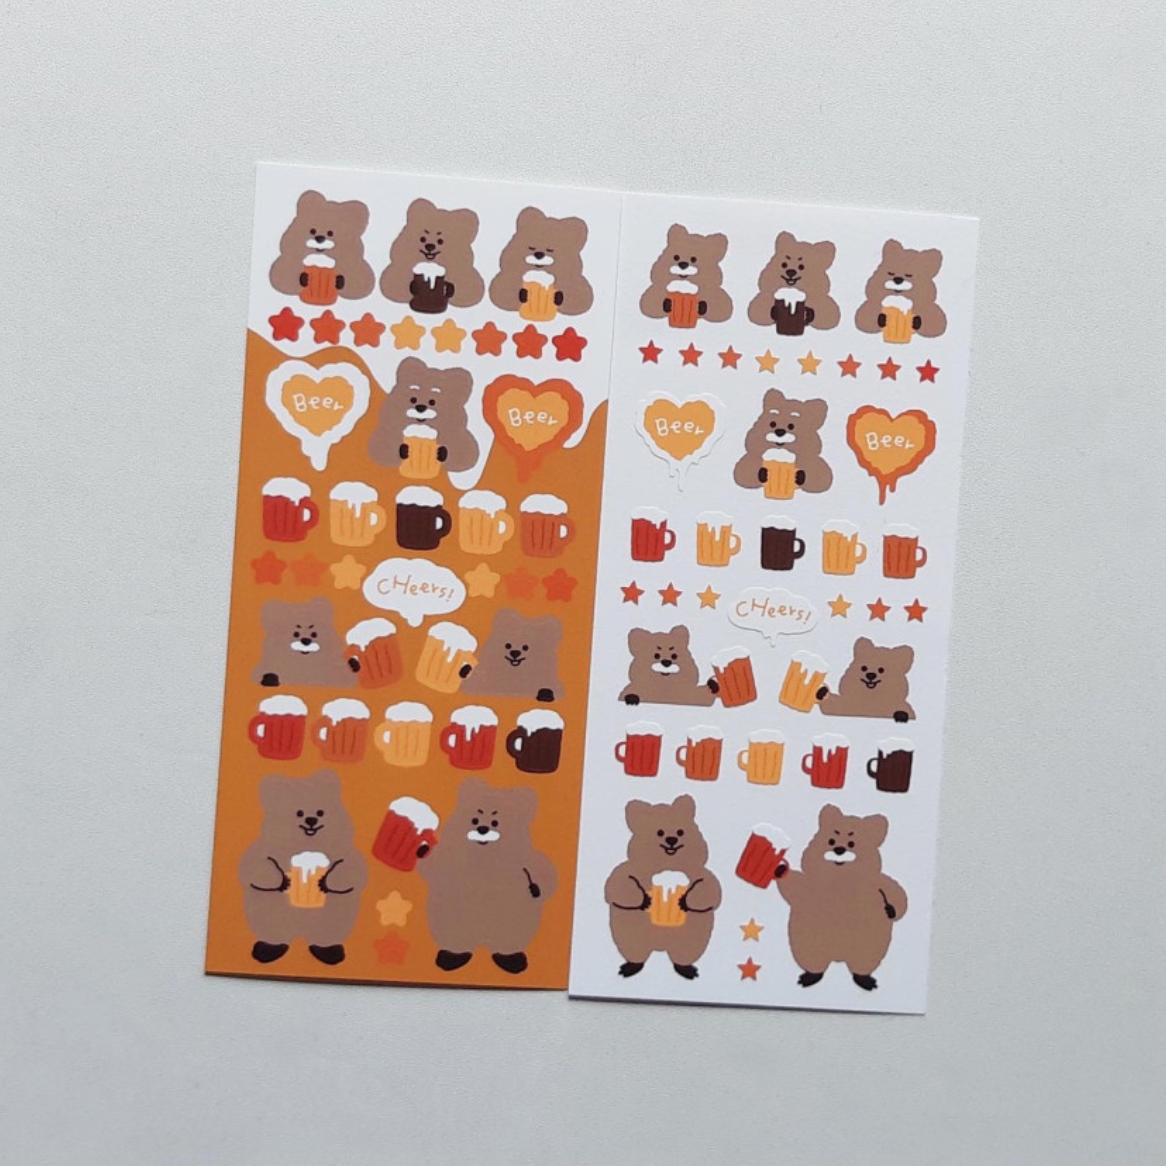 [YOUNG FOREST] Beer Quokka Sticker